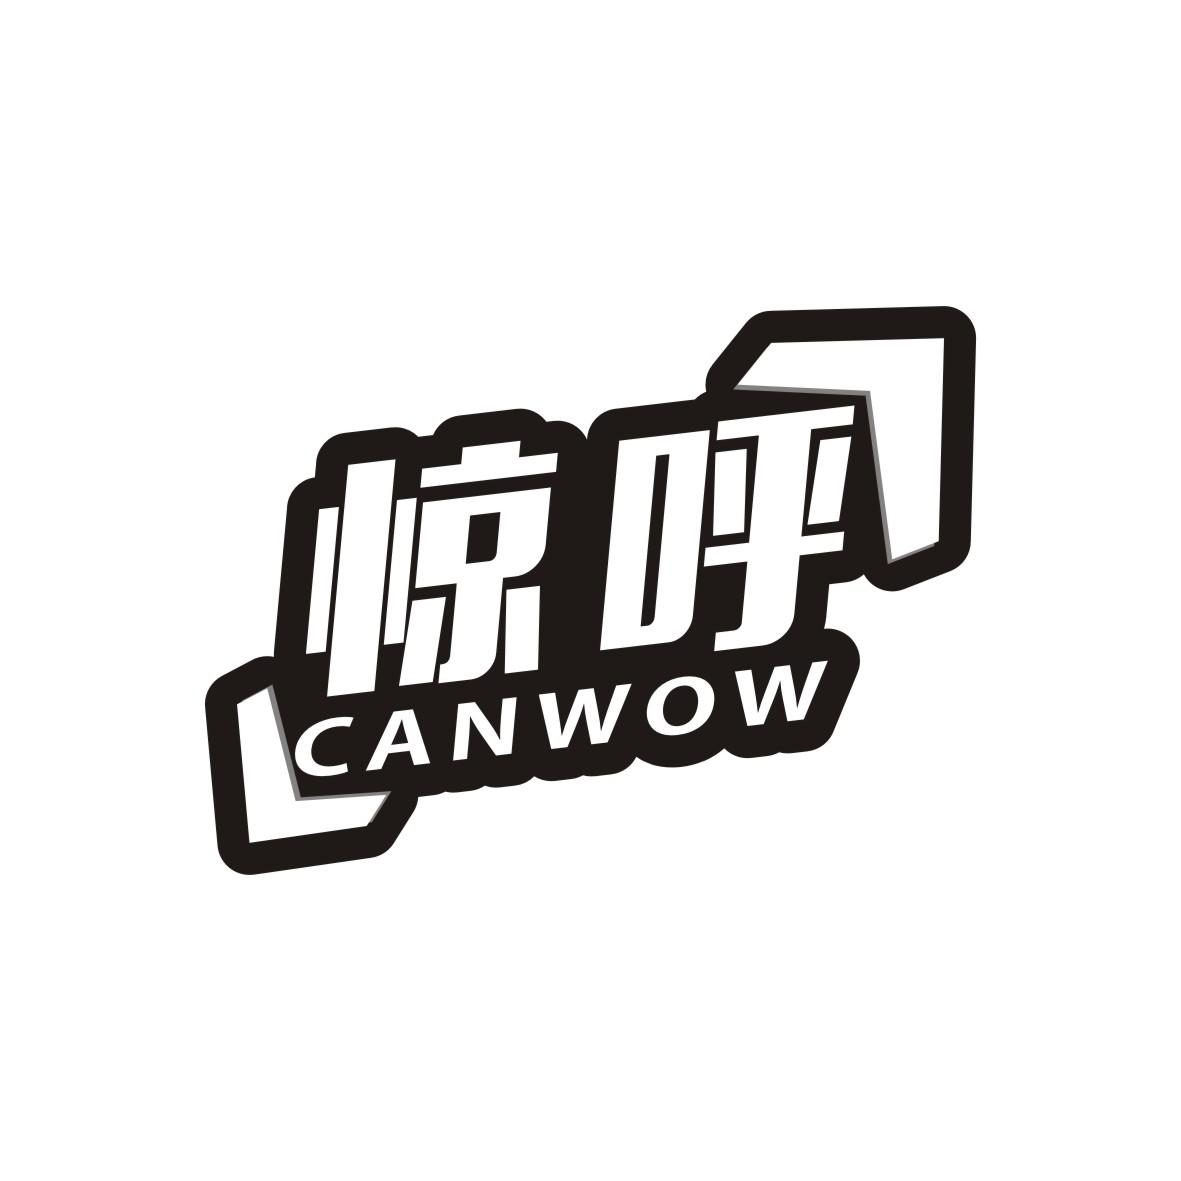  CANWOW